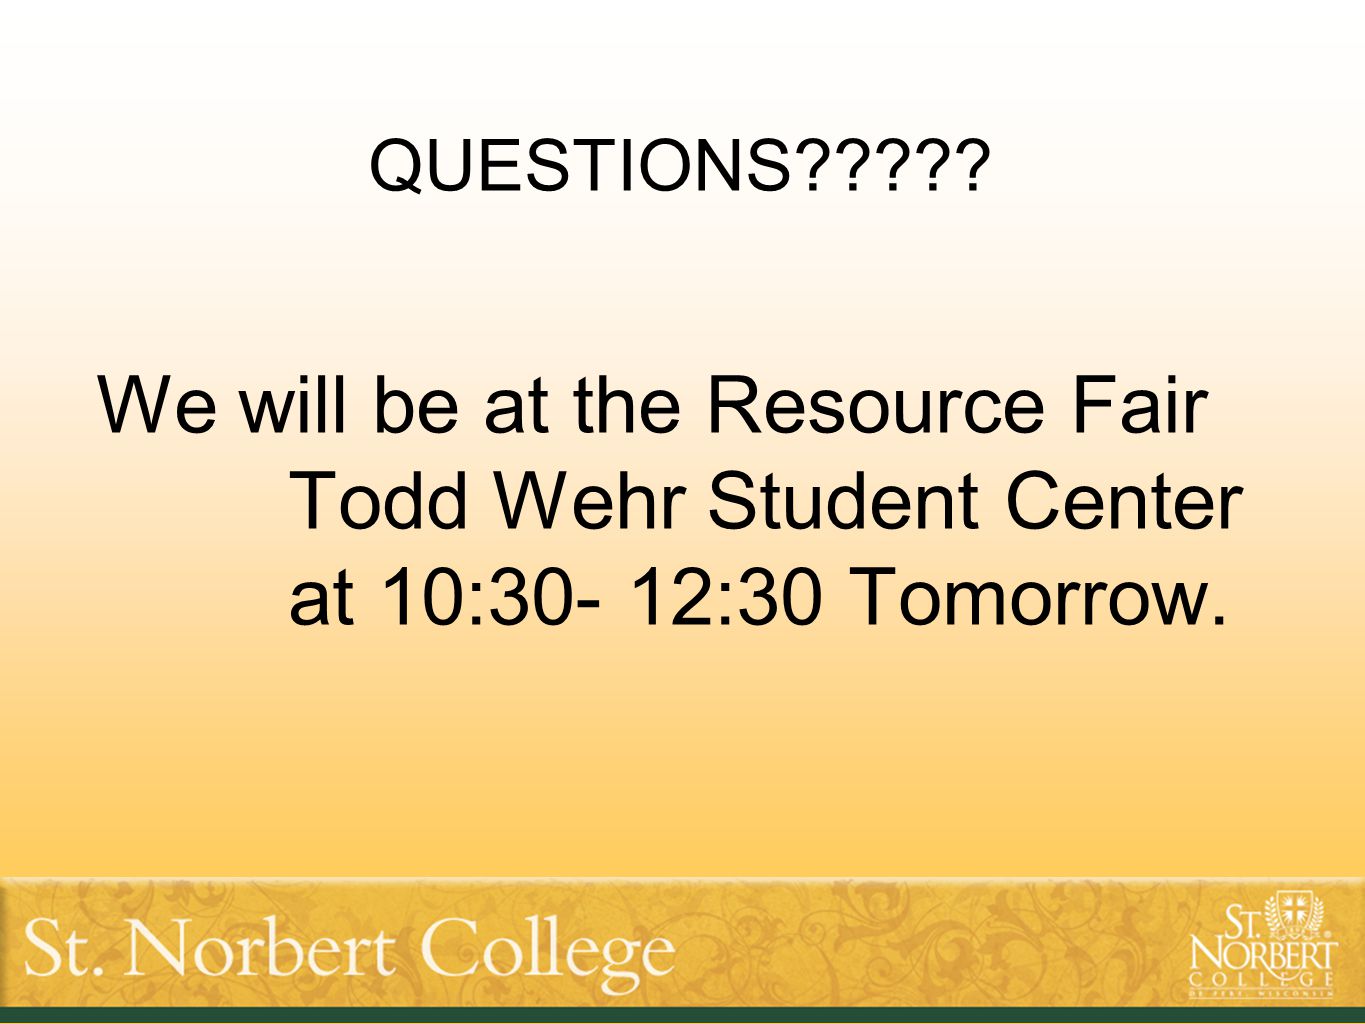 QUESTIONS We will be at the Resource Fair Todd Wehr Student Center at 10:30- 12:30 Tomorrow.